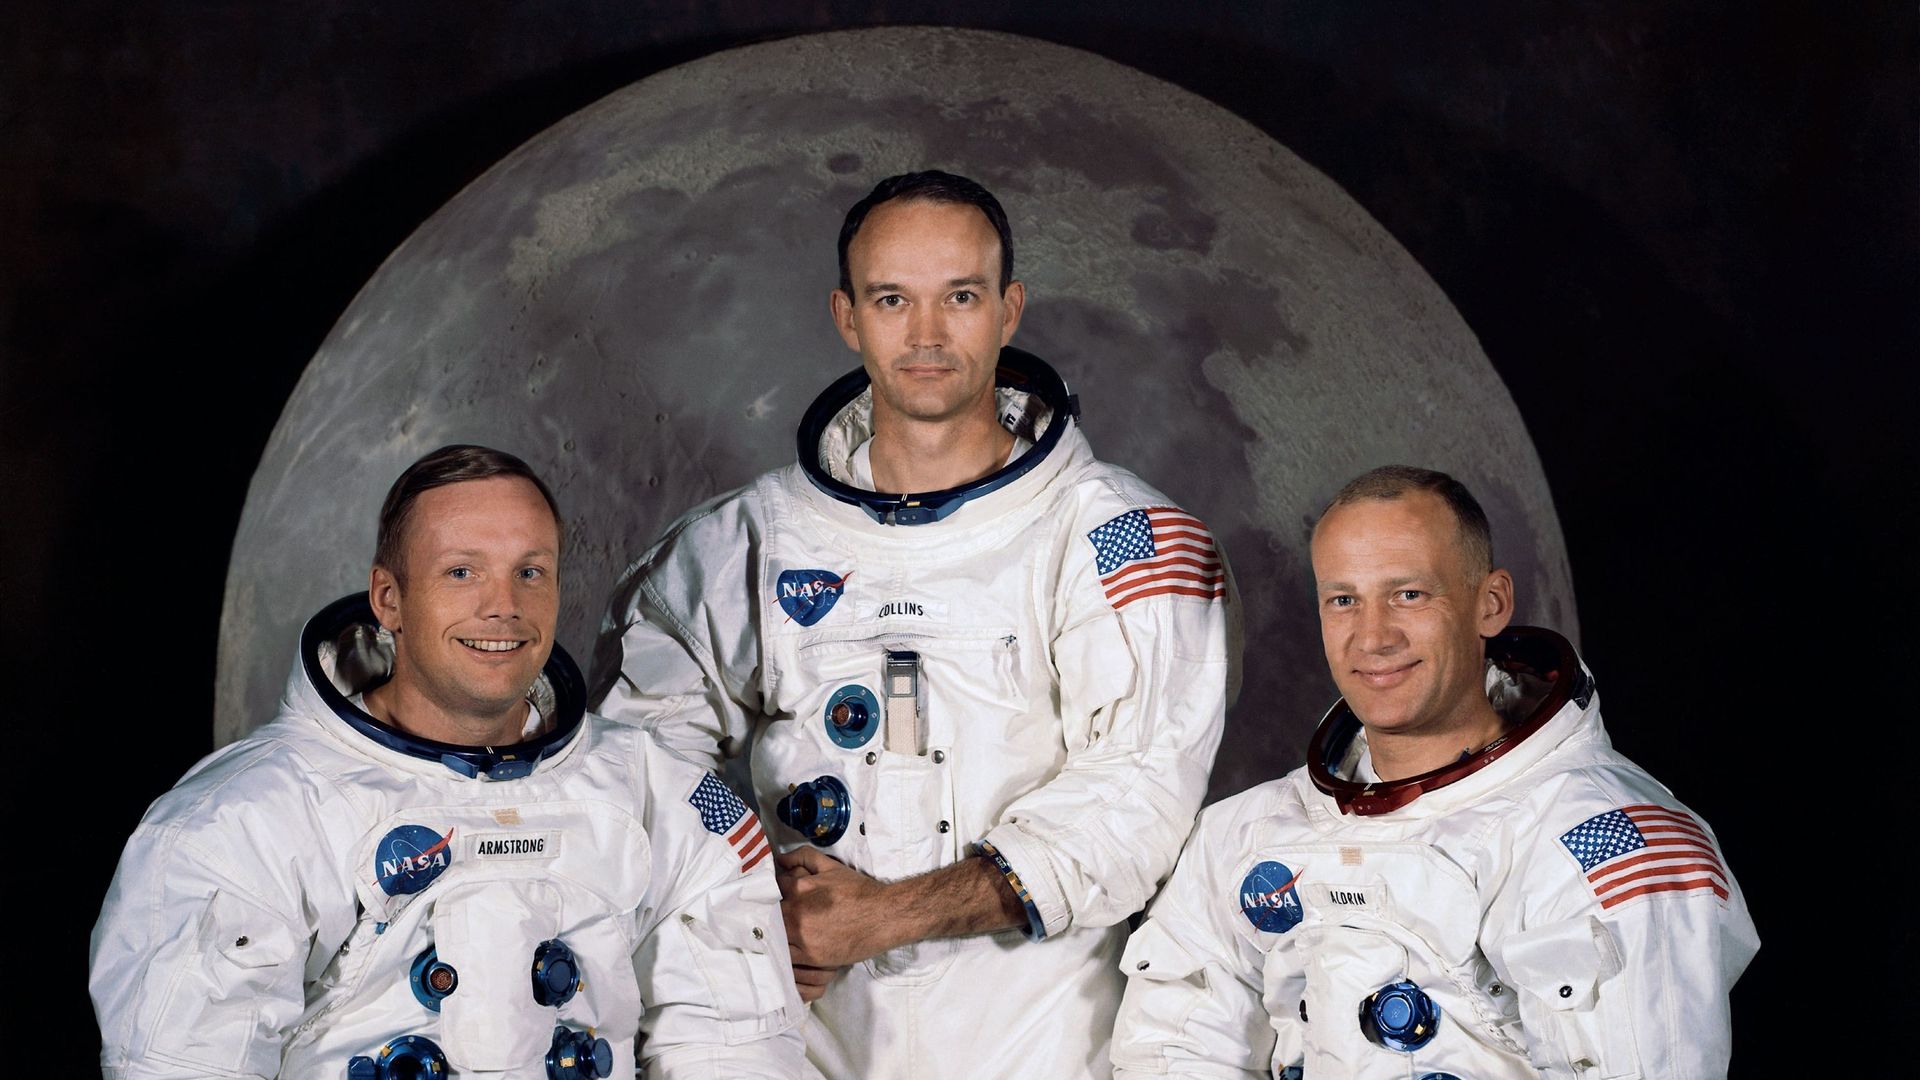 Armstrong, Aldrin et Collins